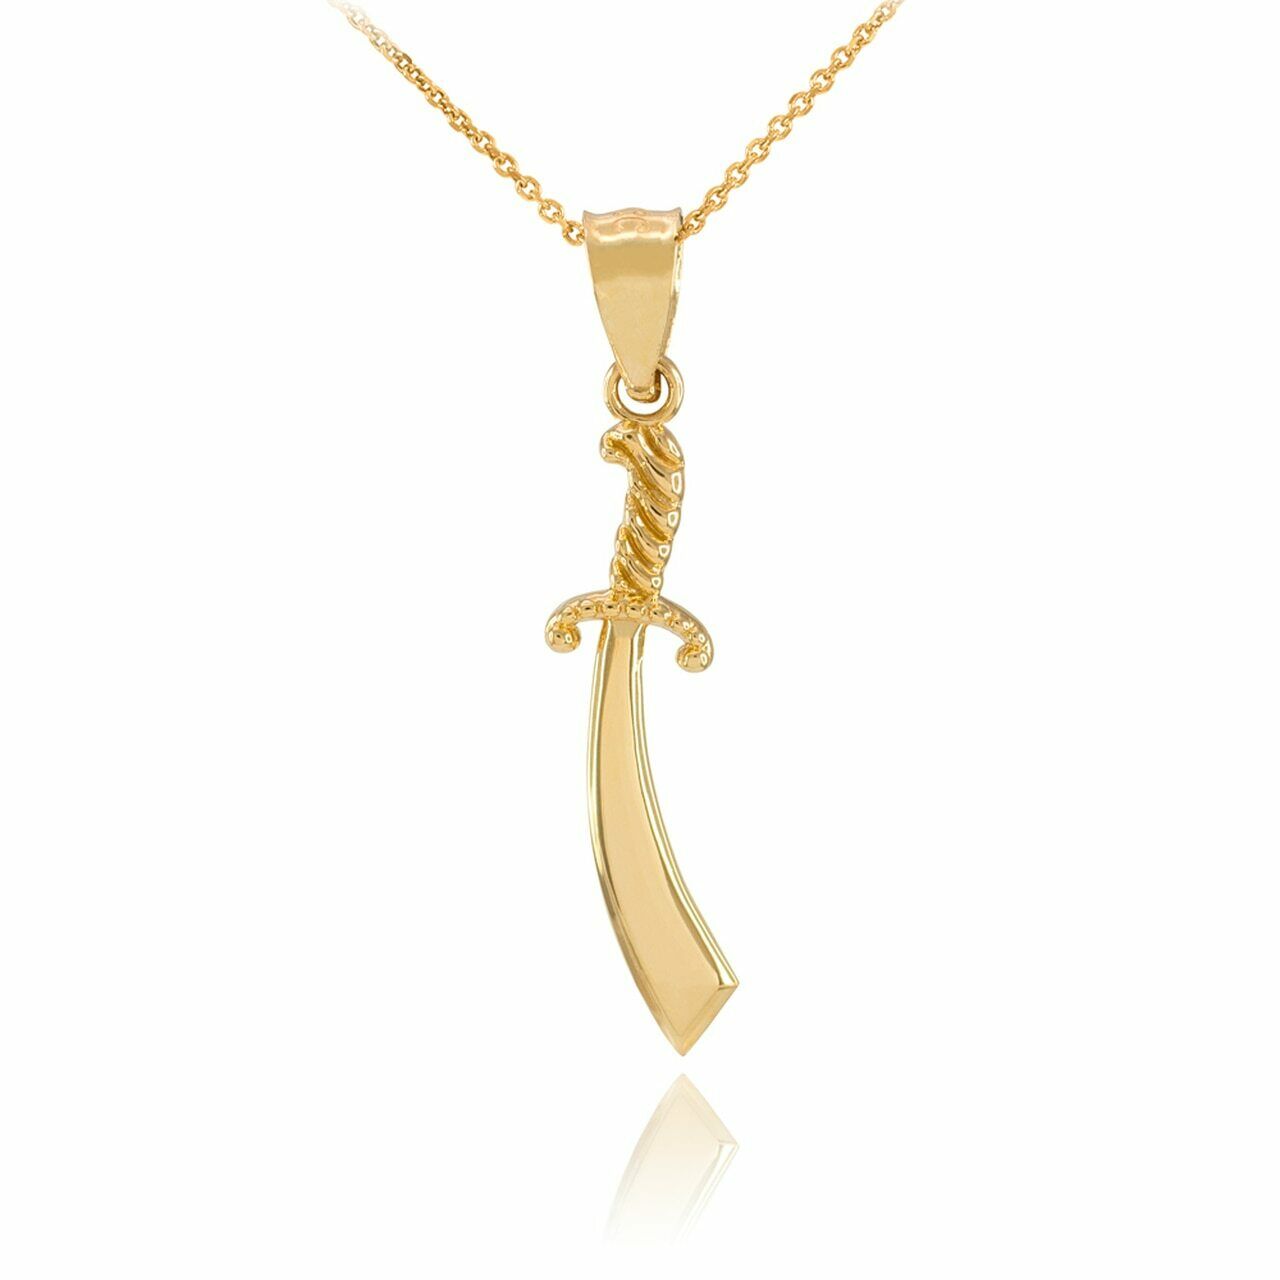 10k Real Solid Yellow Gold Scimitar Sword Pendant Necklace